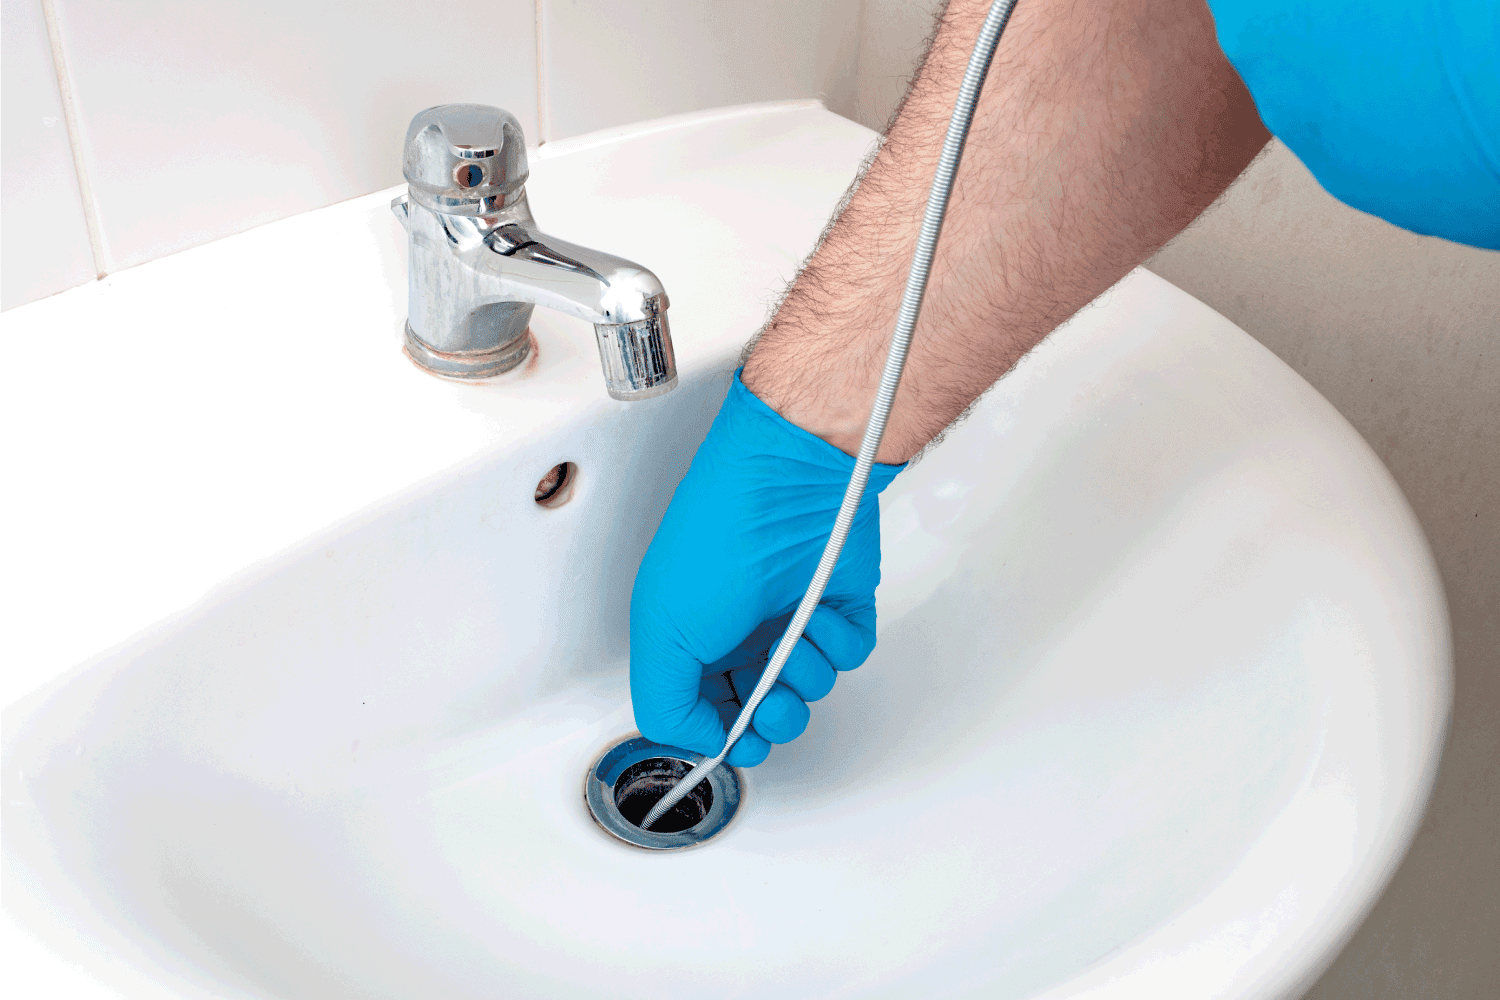 Plumbing issues, occupation in sanitation and handyman contractor concept with plumber repairing drain with plumbers snake